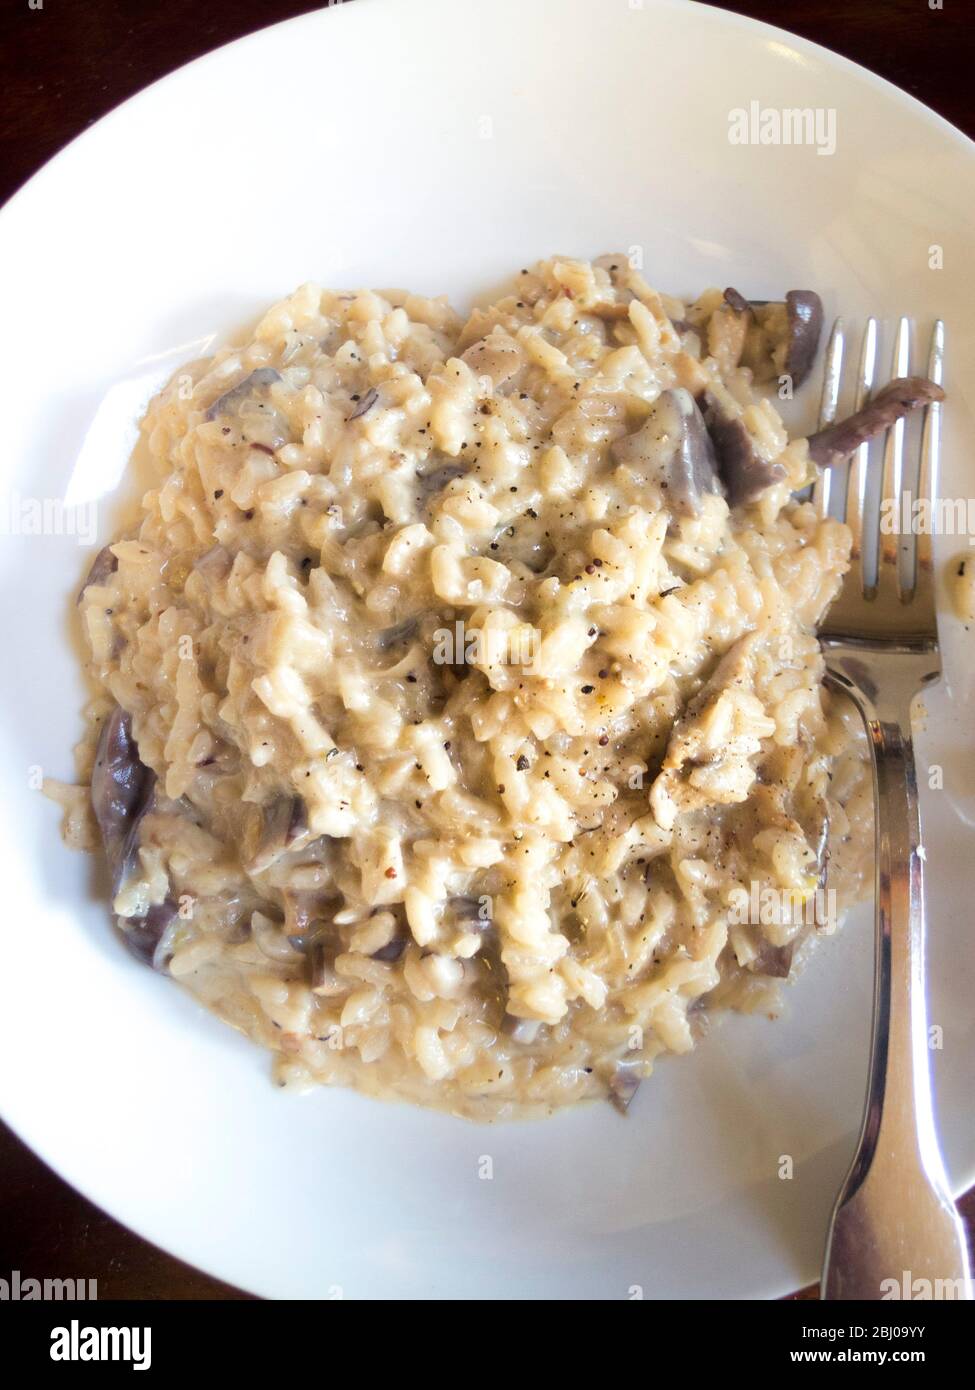 RIsotto made with canarola rice with wild mushrooms Stock Photo